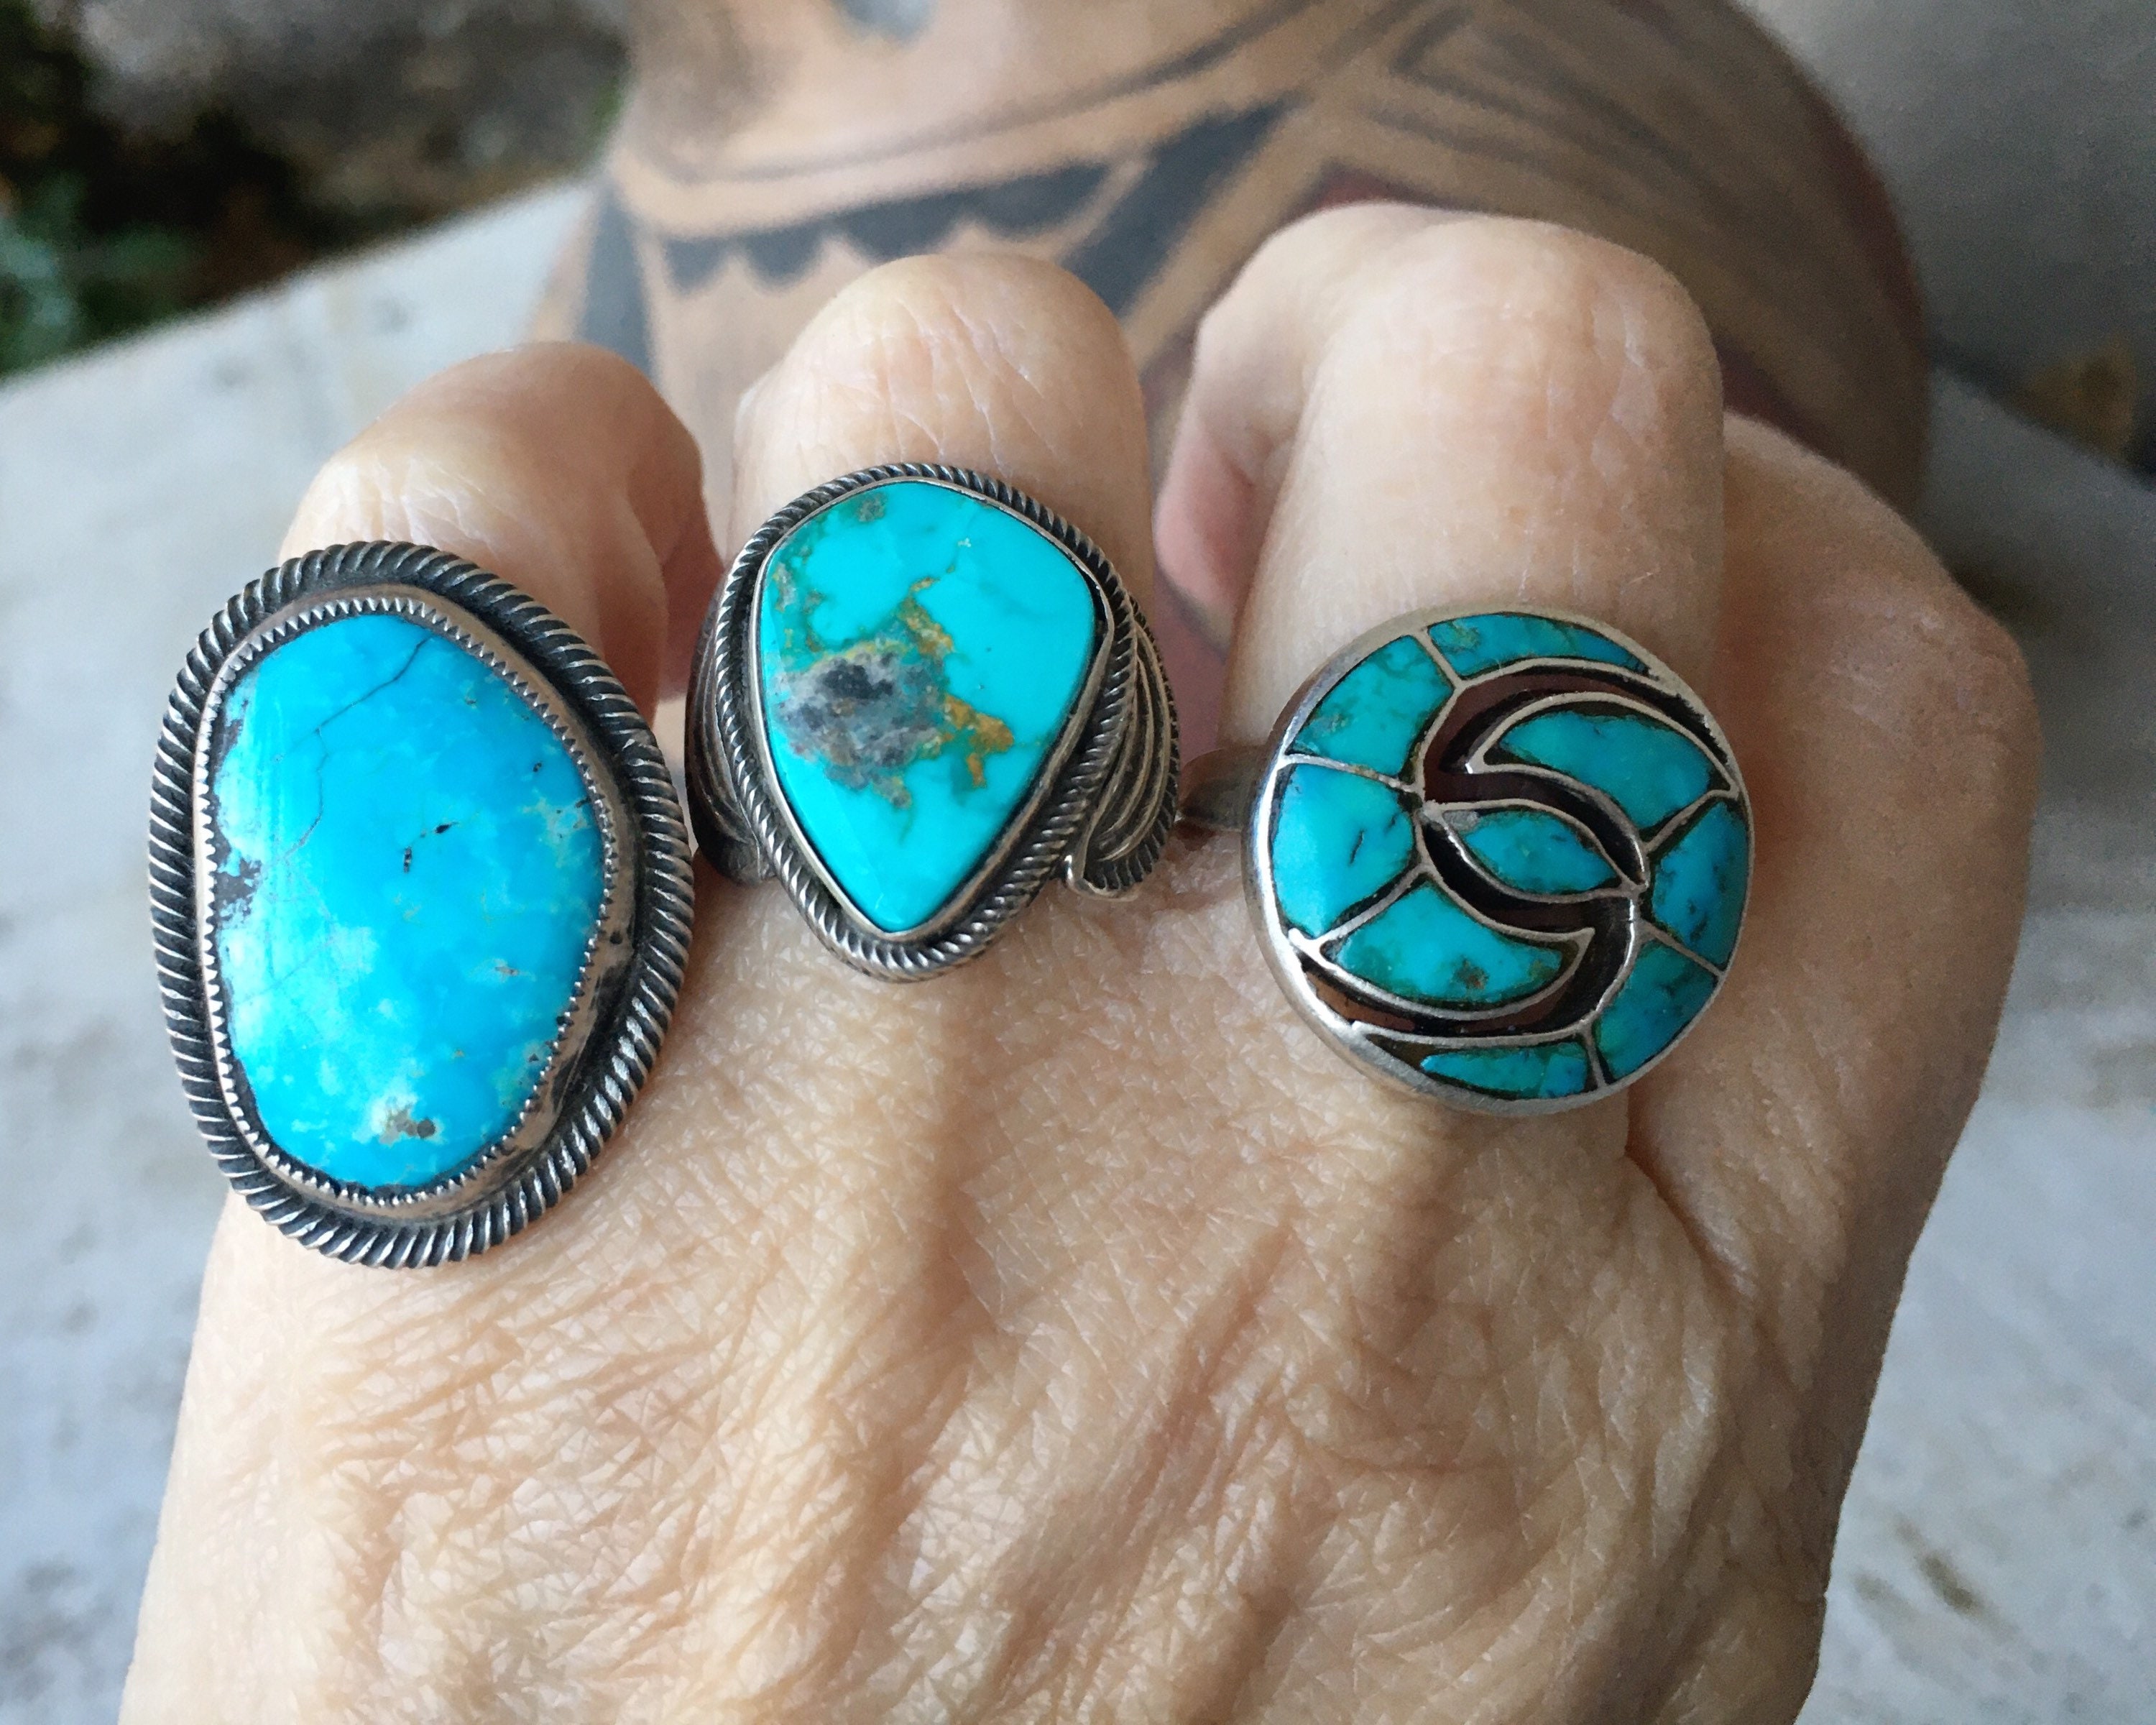 Vintage Turquoise Ring Zuni Quandelacy Channel Inlay Hummingbird Design ...